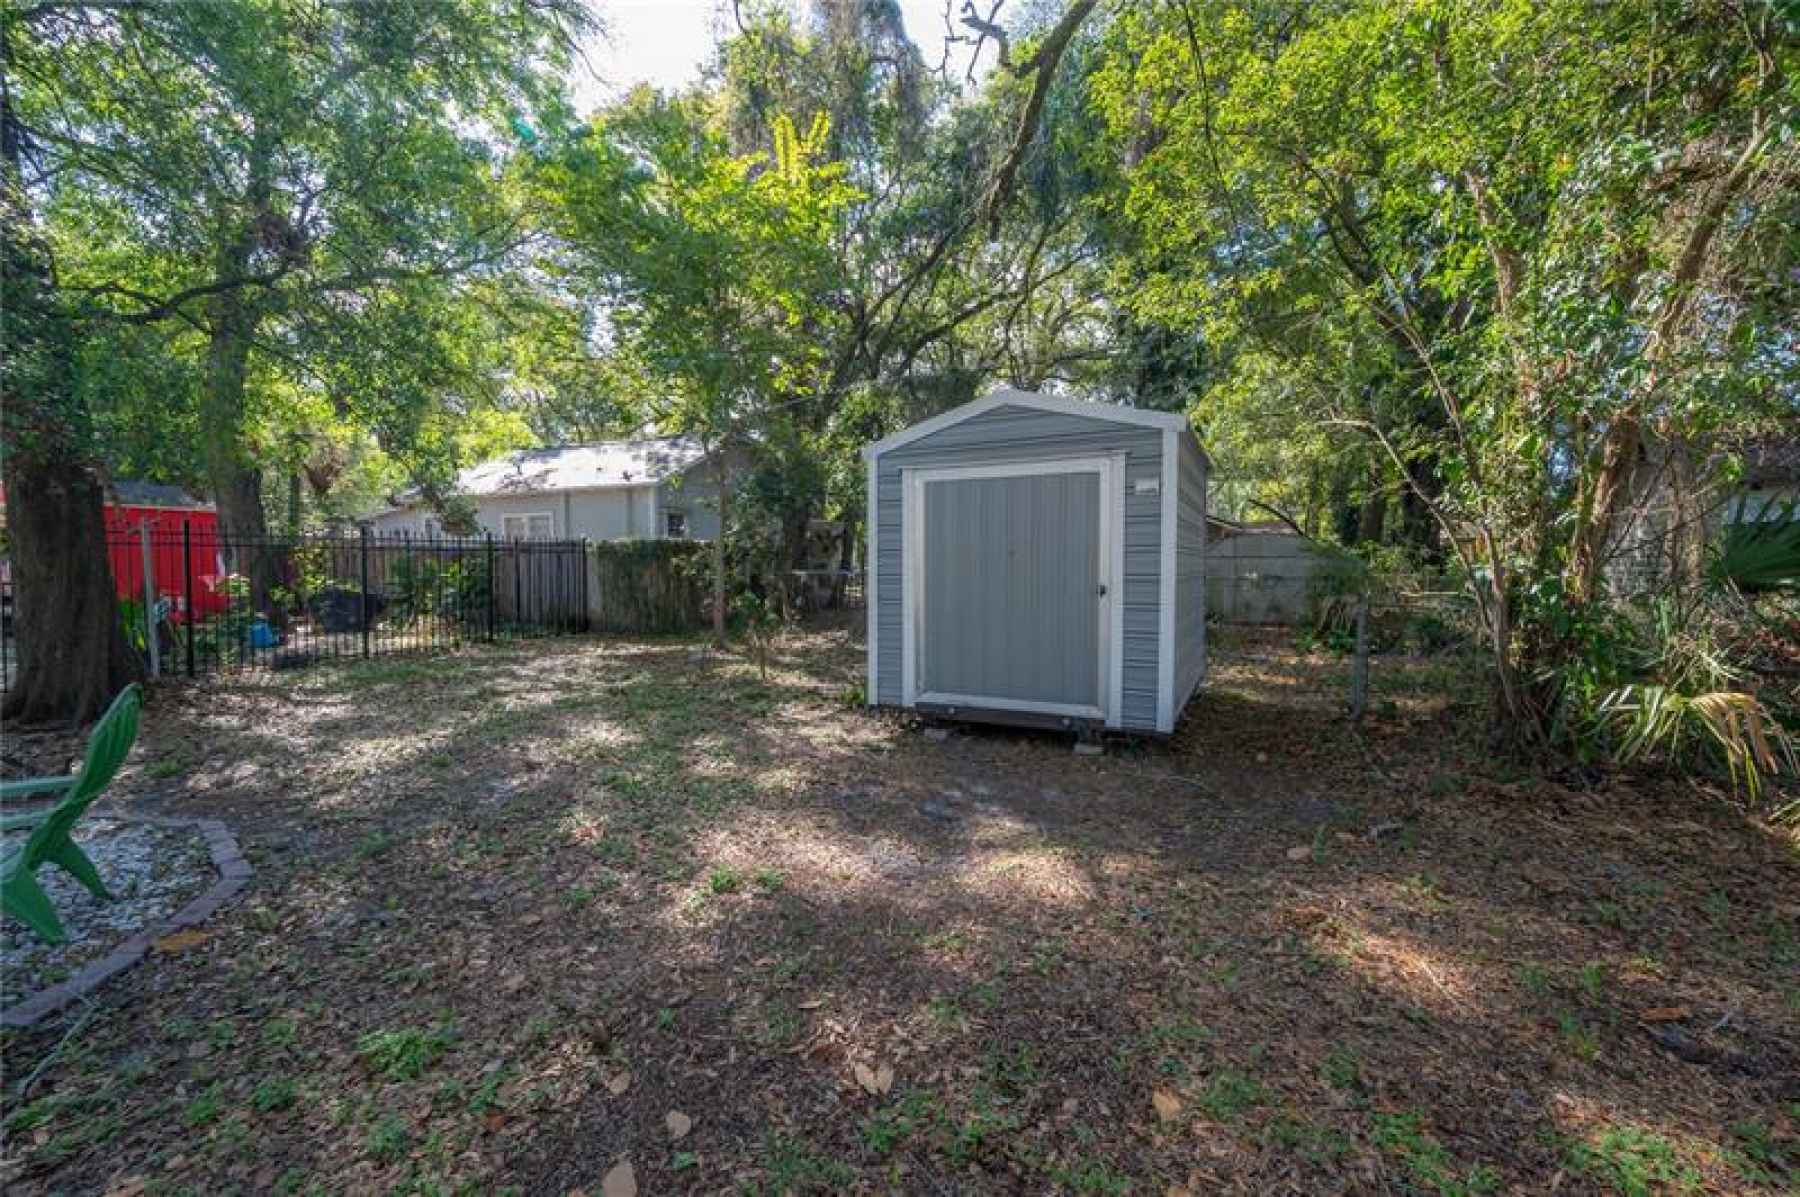 Large Shed in backyard